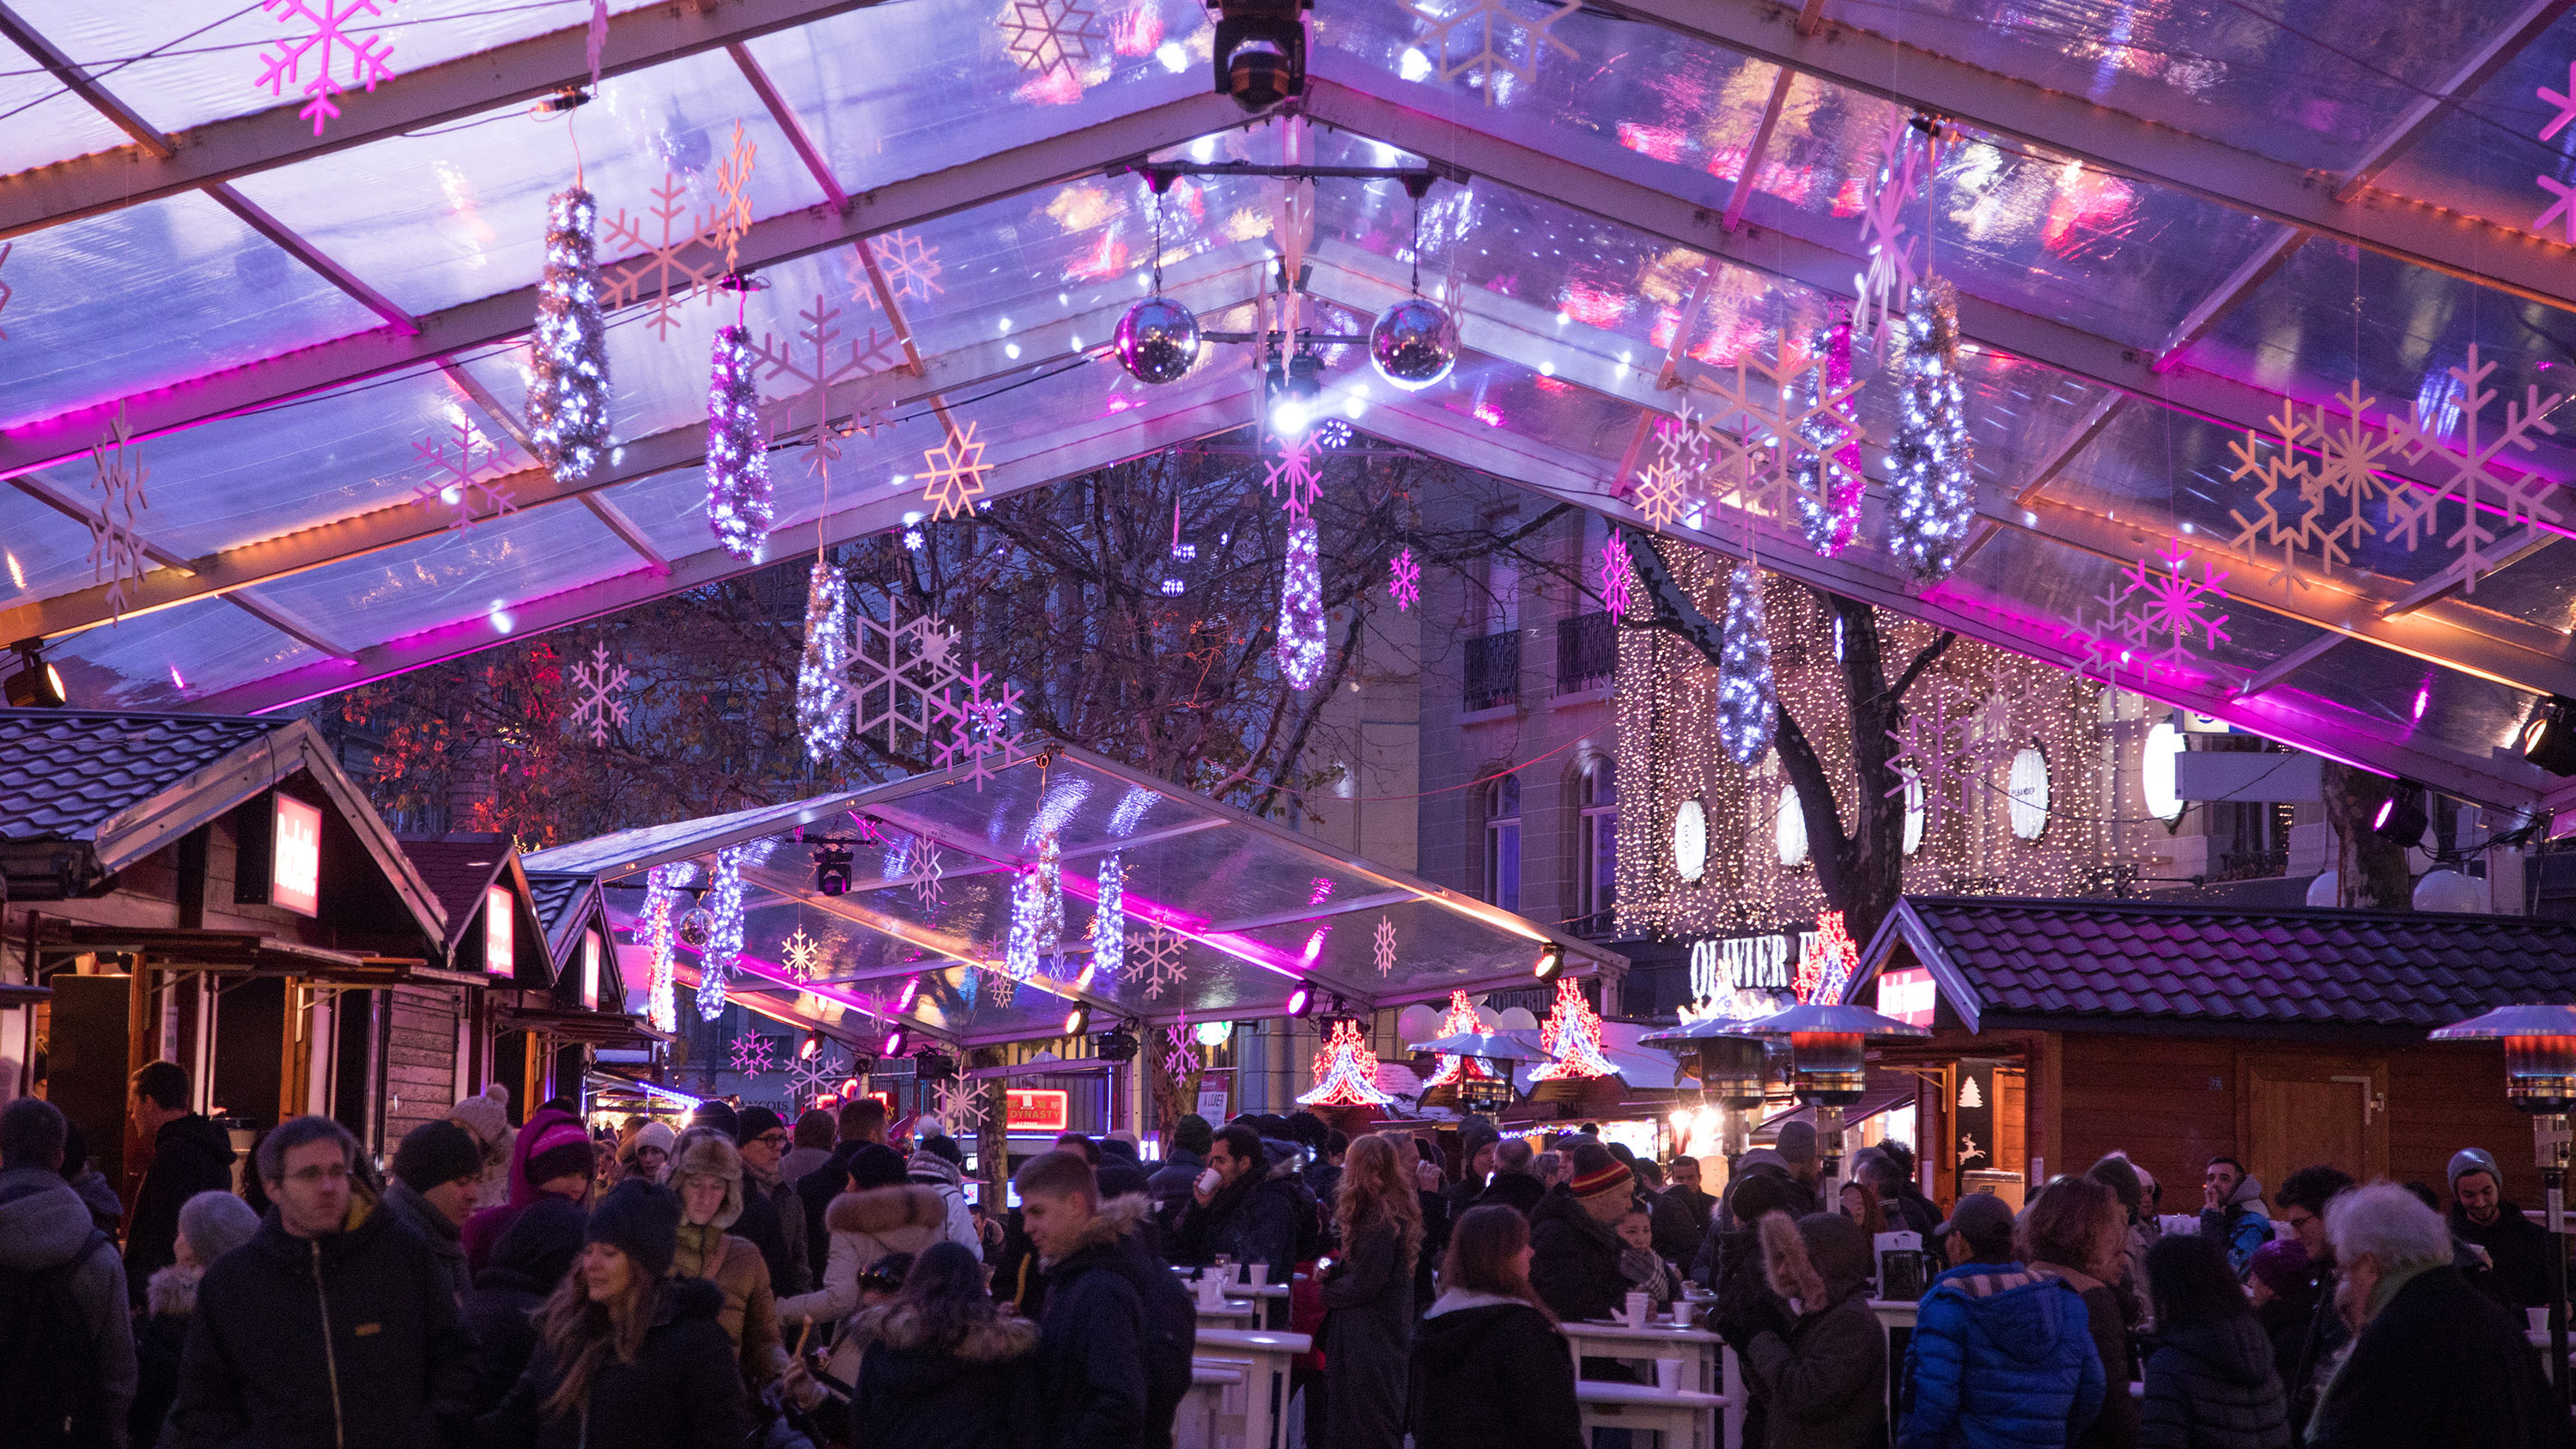 CHRISTMAS MARKETS AND END-OF-YEAR CELEBRATIONS